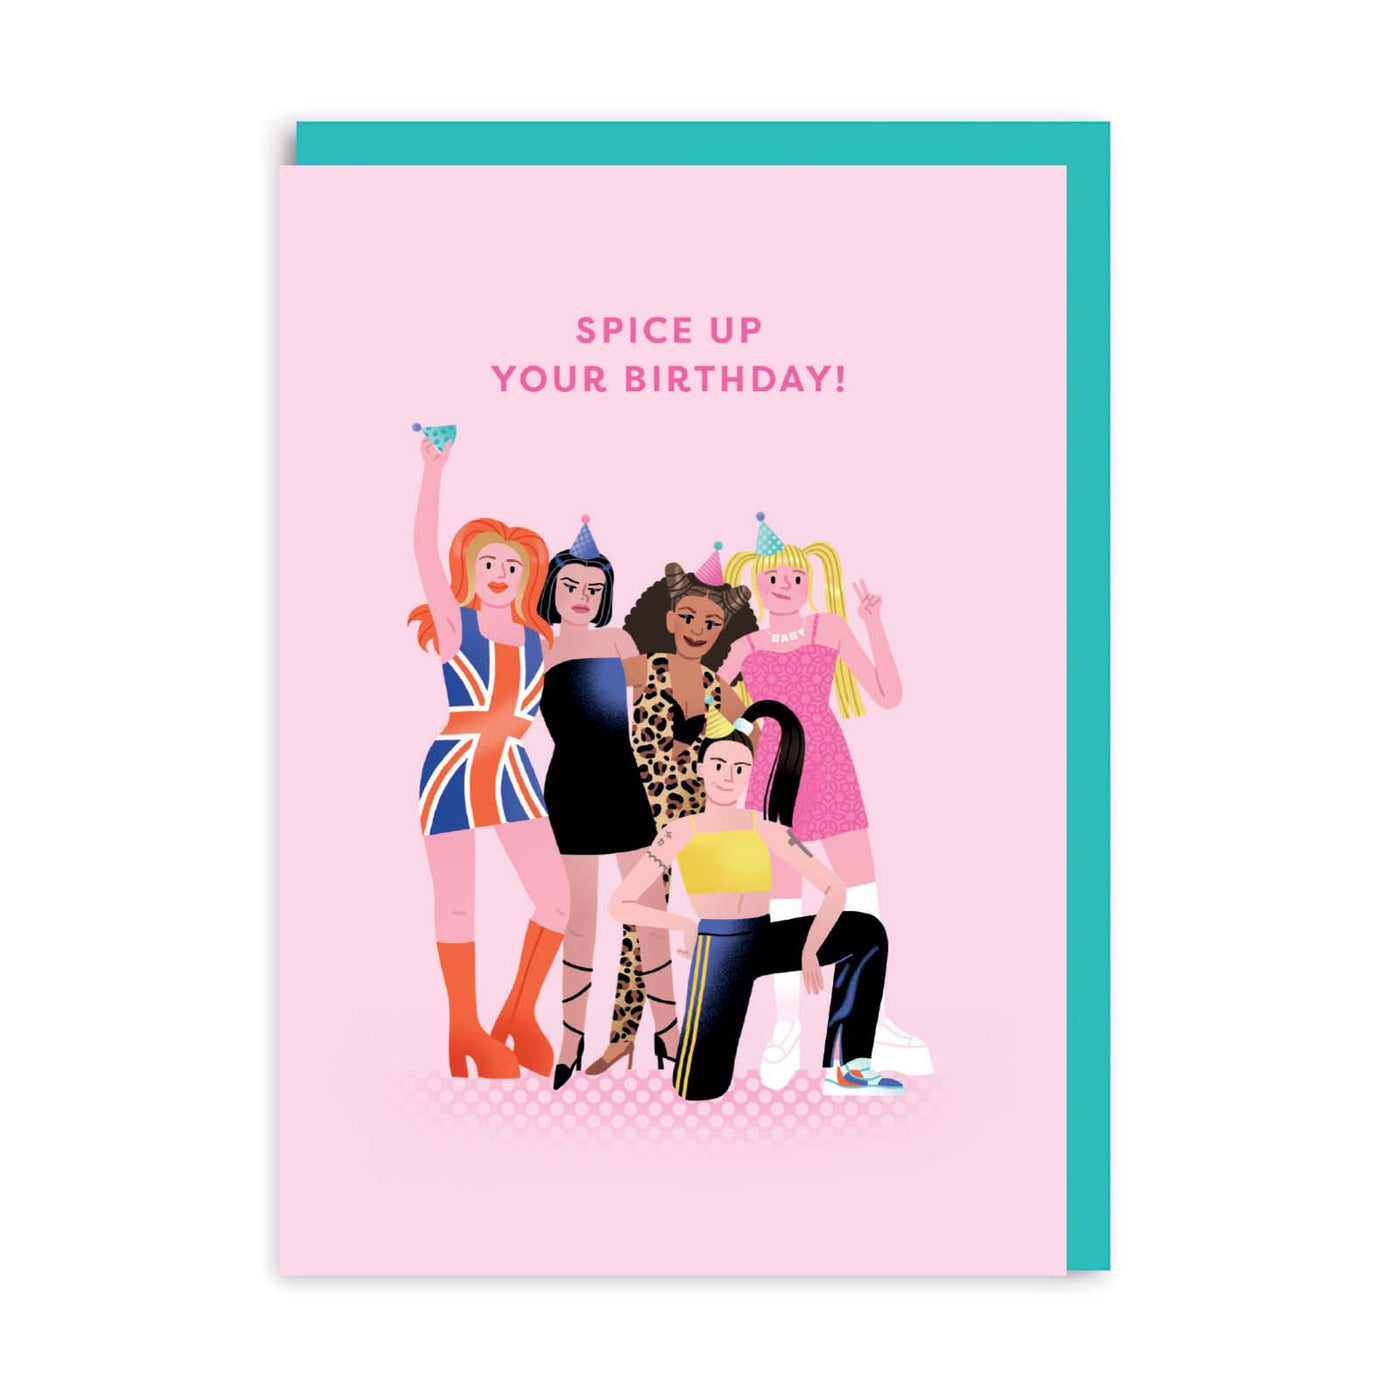 Spice Up Your Birthday (Spice Girls) -  Greetings Card